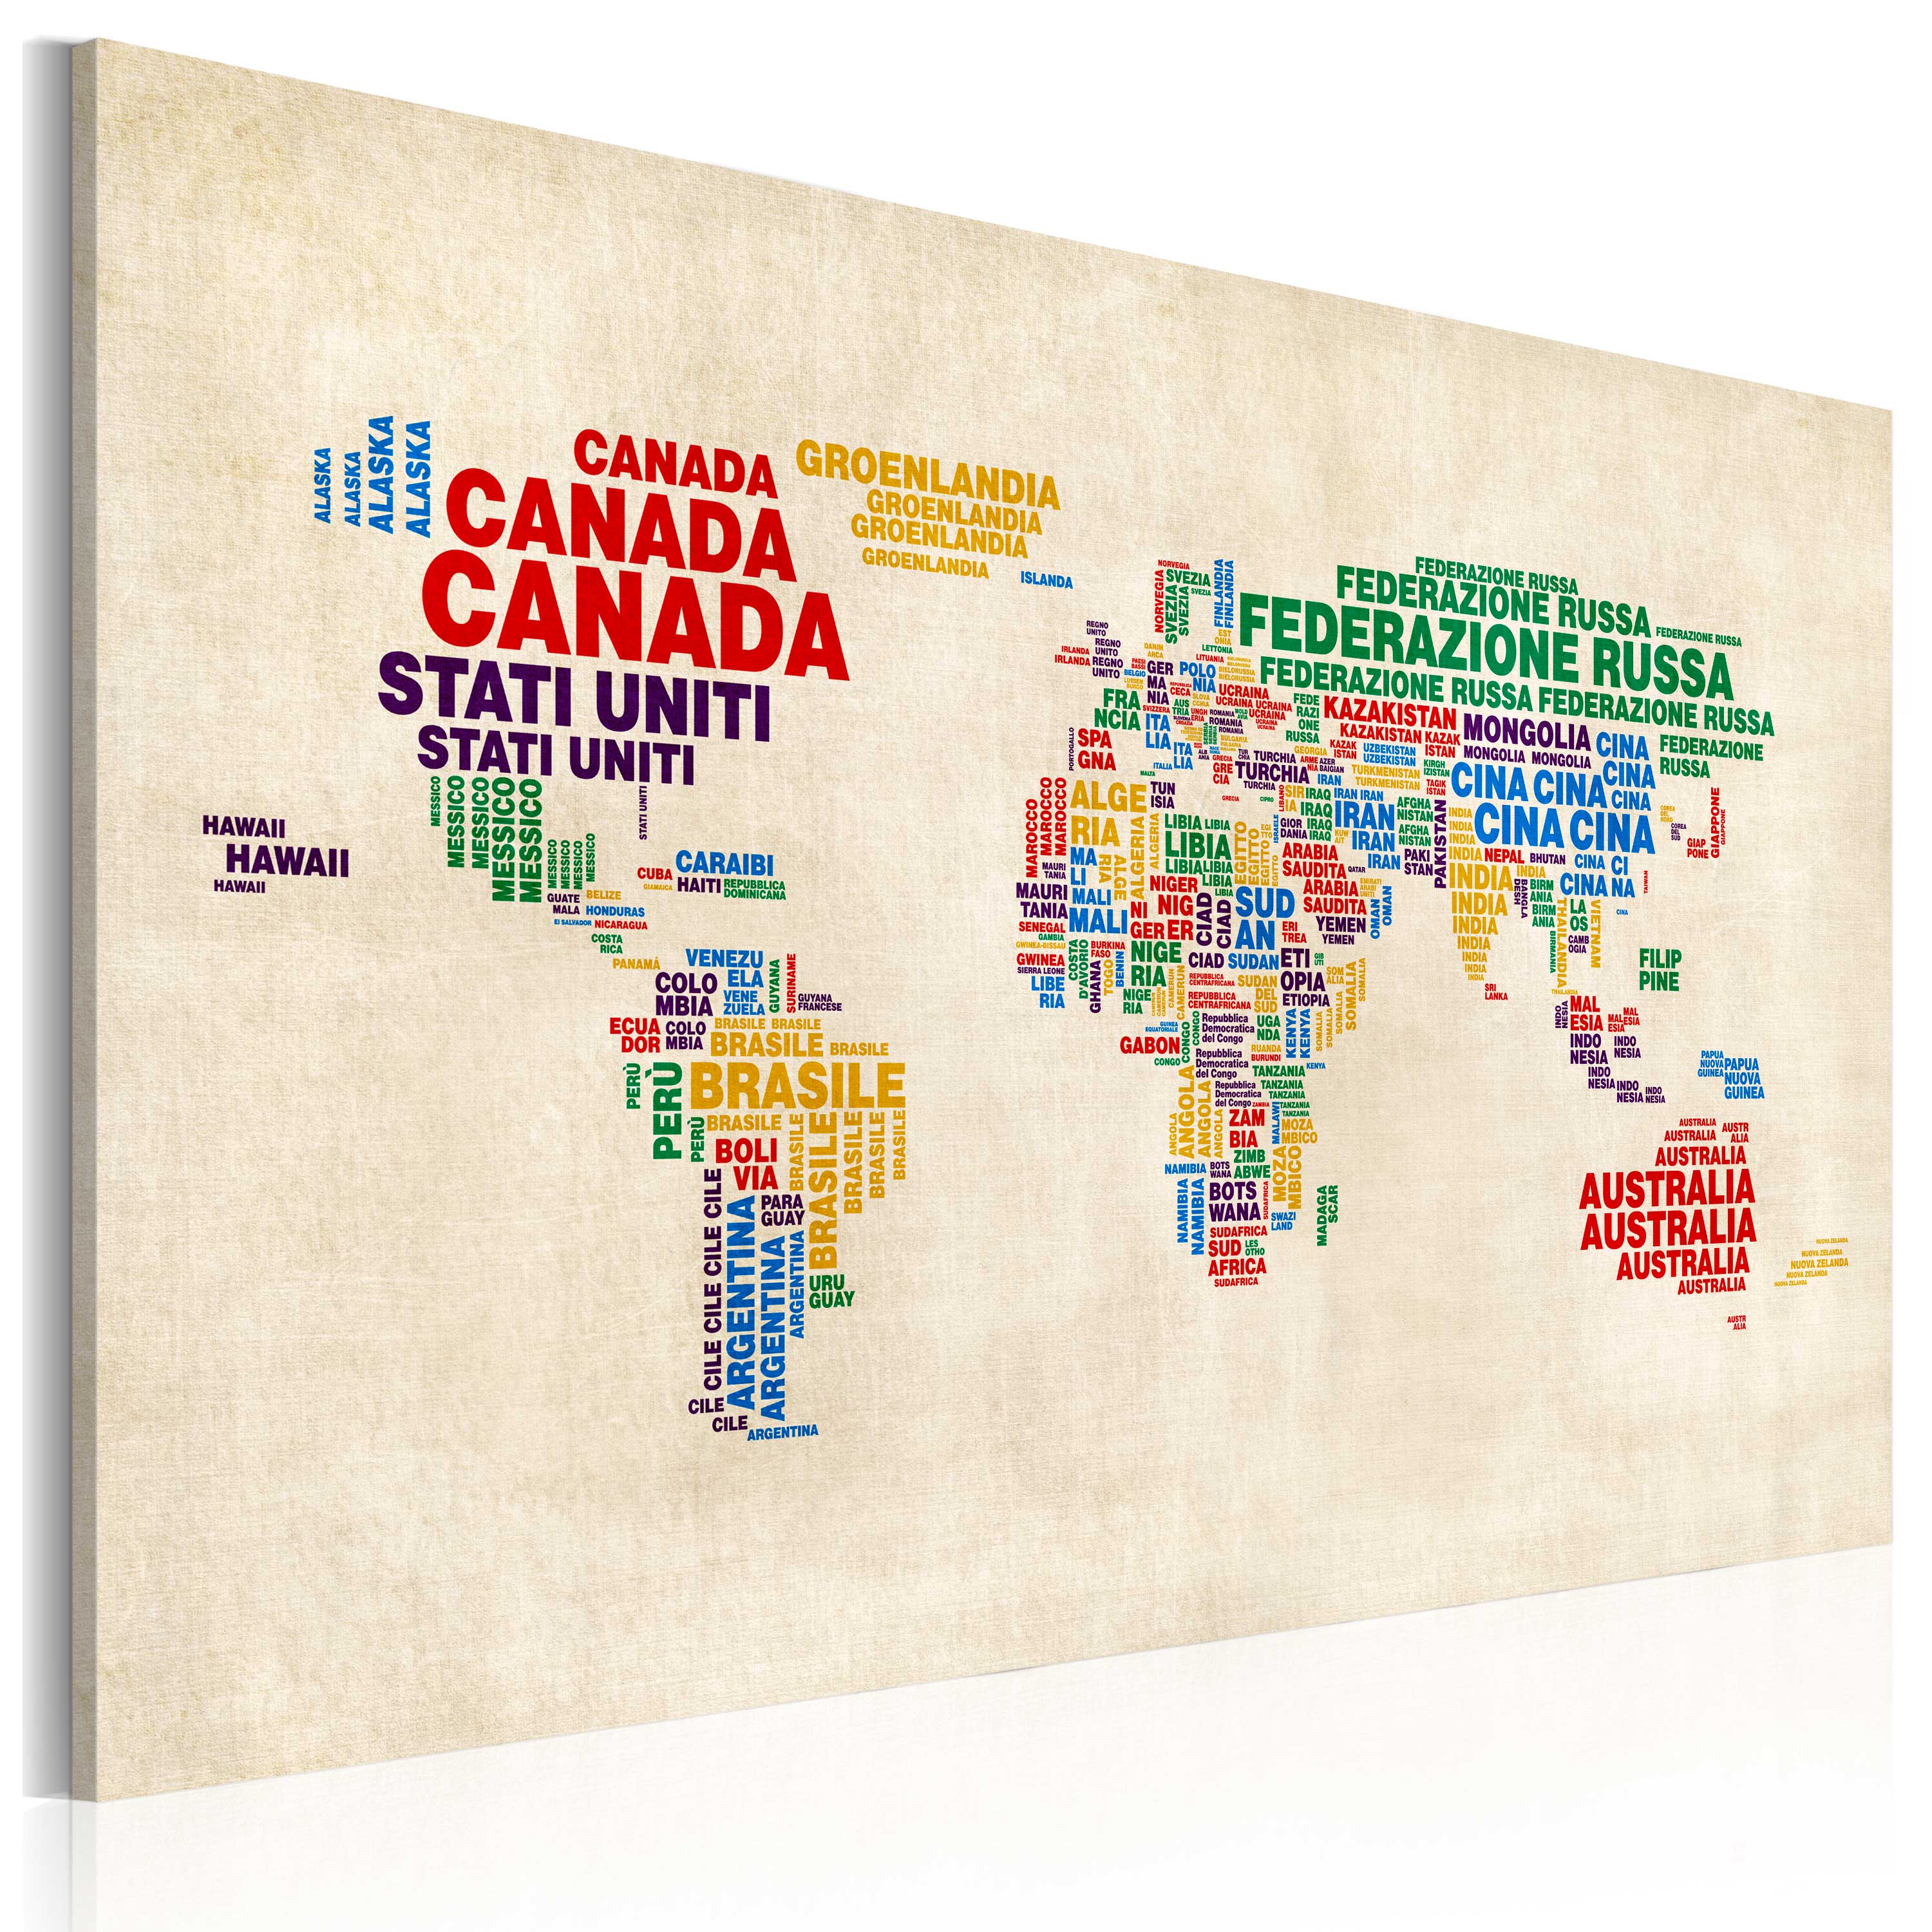 Canvas Print - Italian names of countries in vivid colors - 60x40